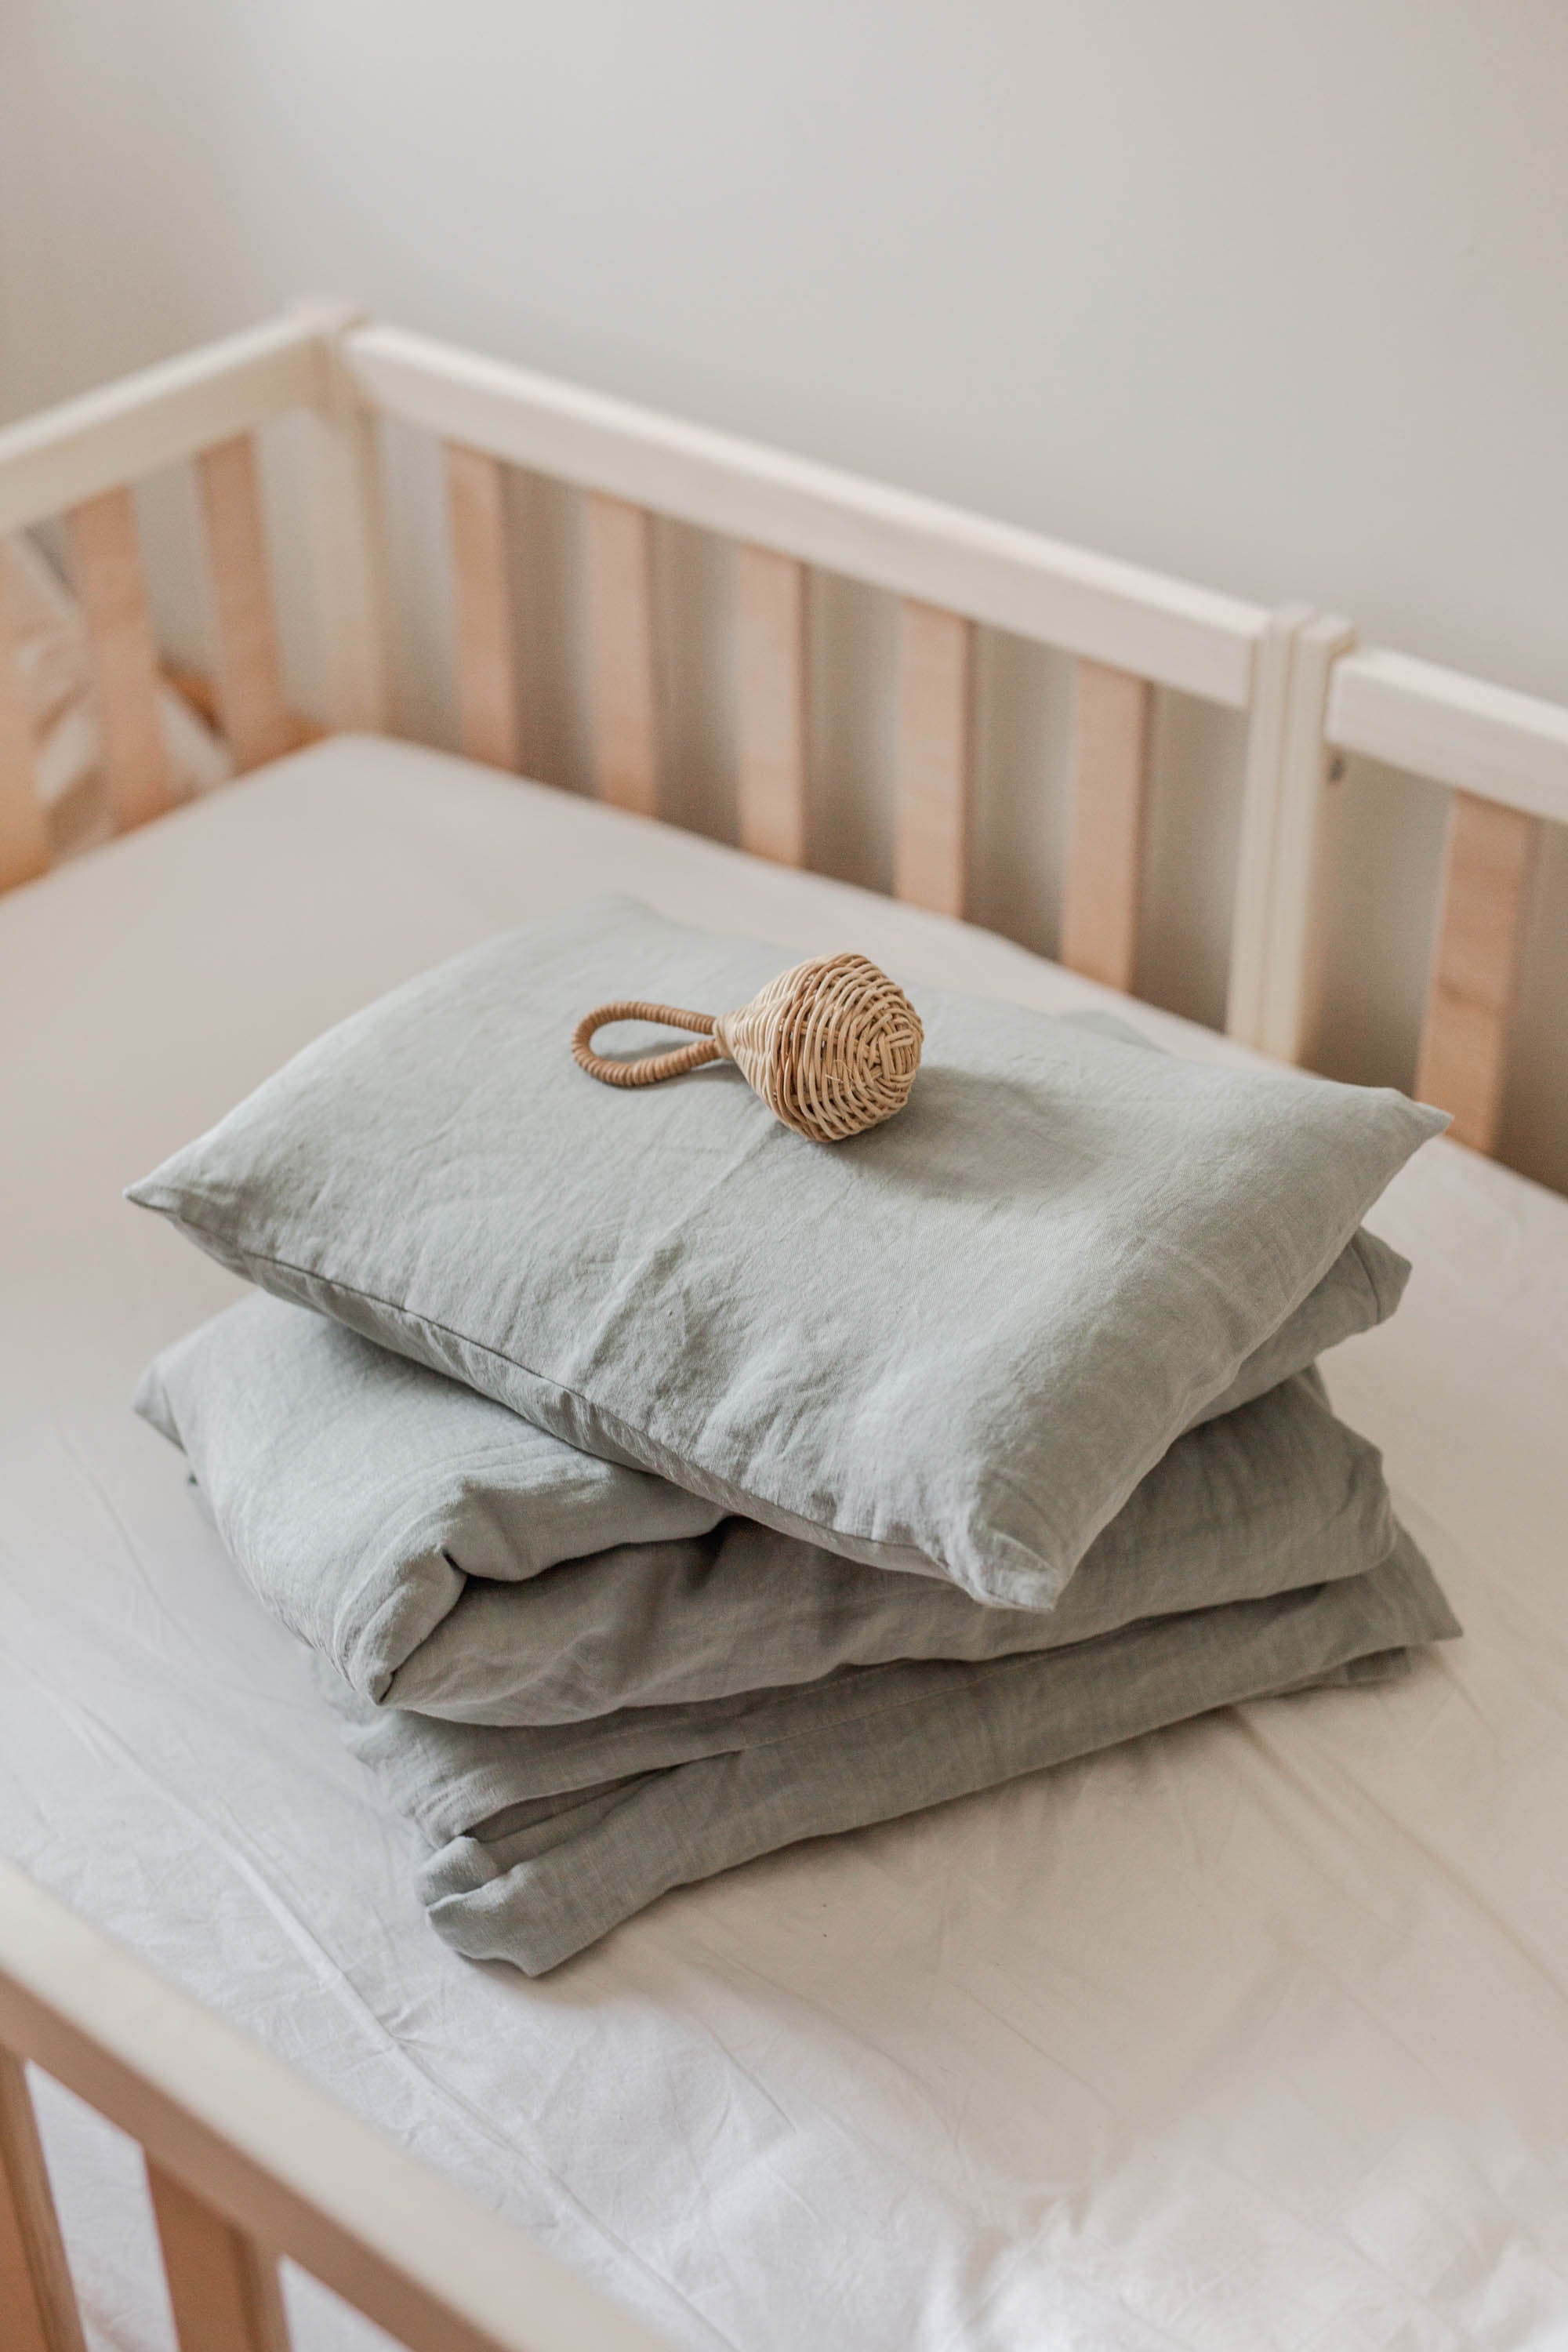 Sage Green Linen Baby Bedding By AmourlInen